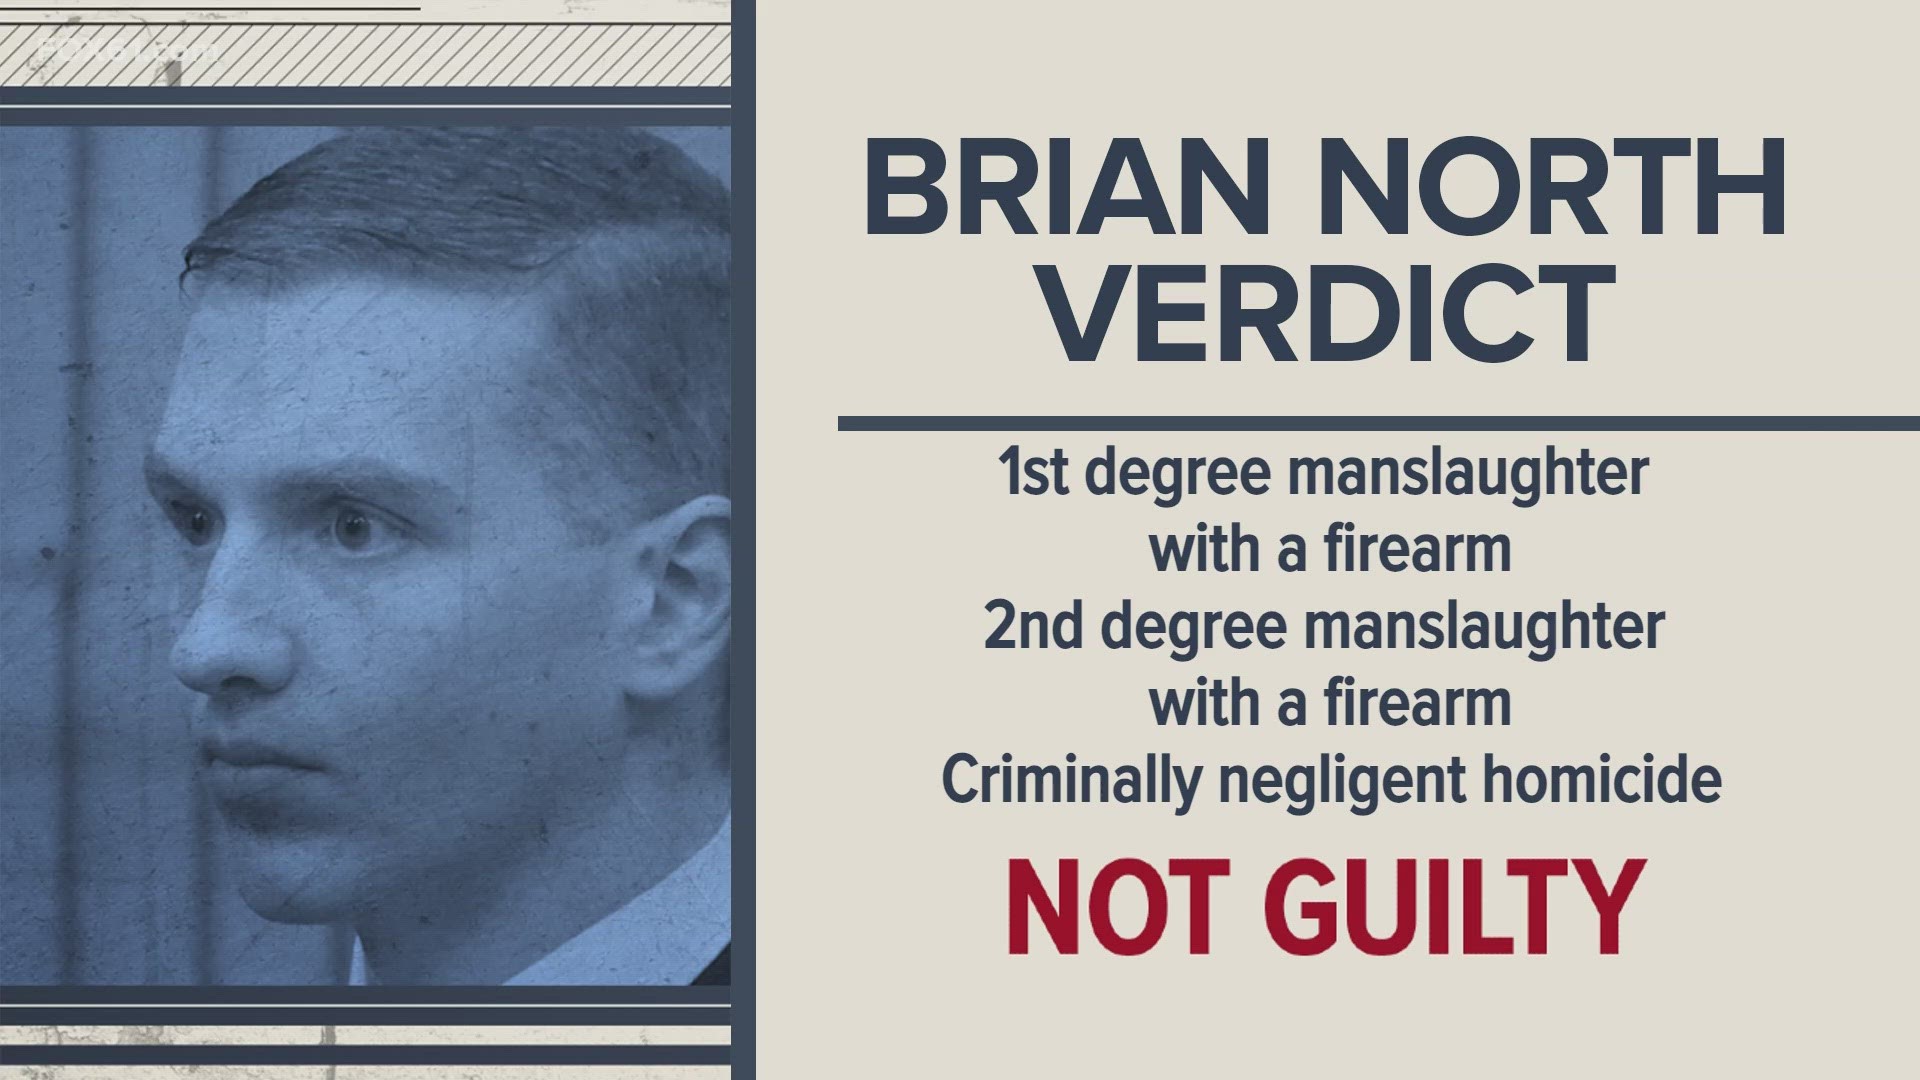 A jury acquitted former state trooper Brian North on all counts